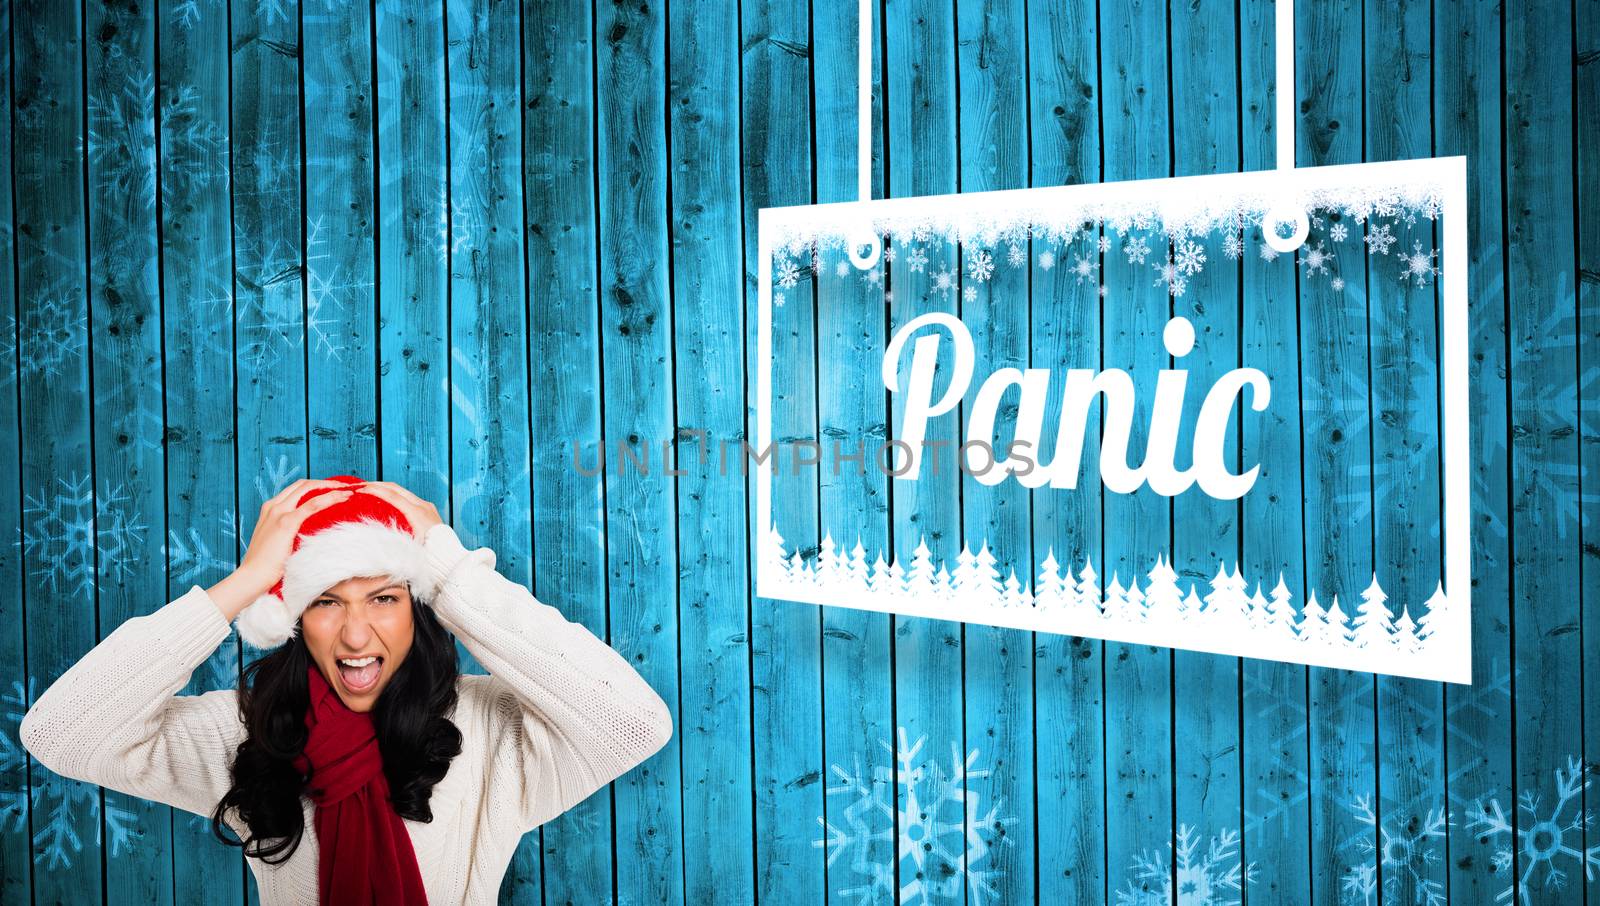 Irritated woman looking at camera against snowflake pattern on blue planks